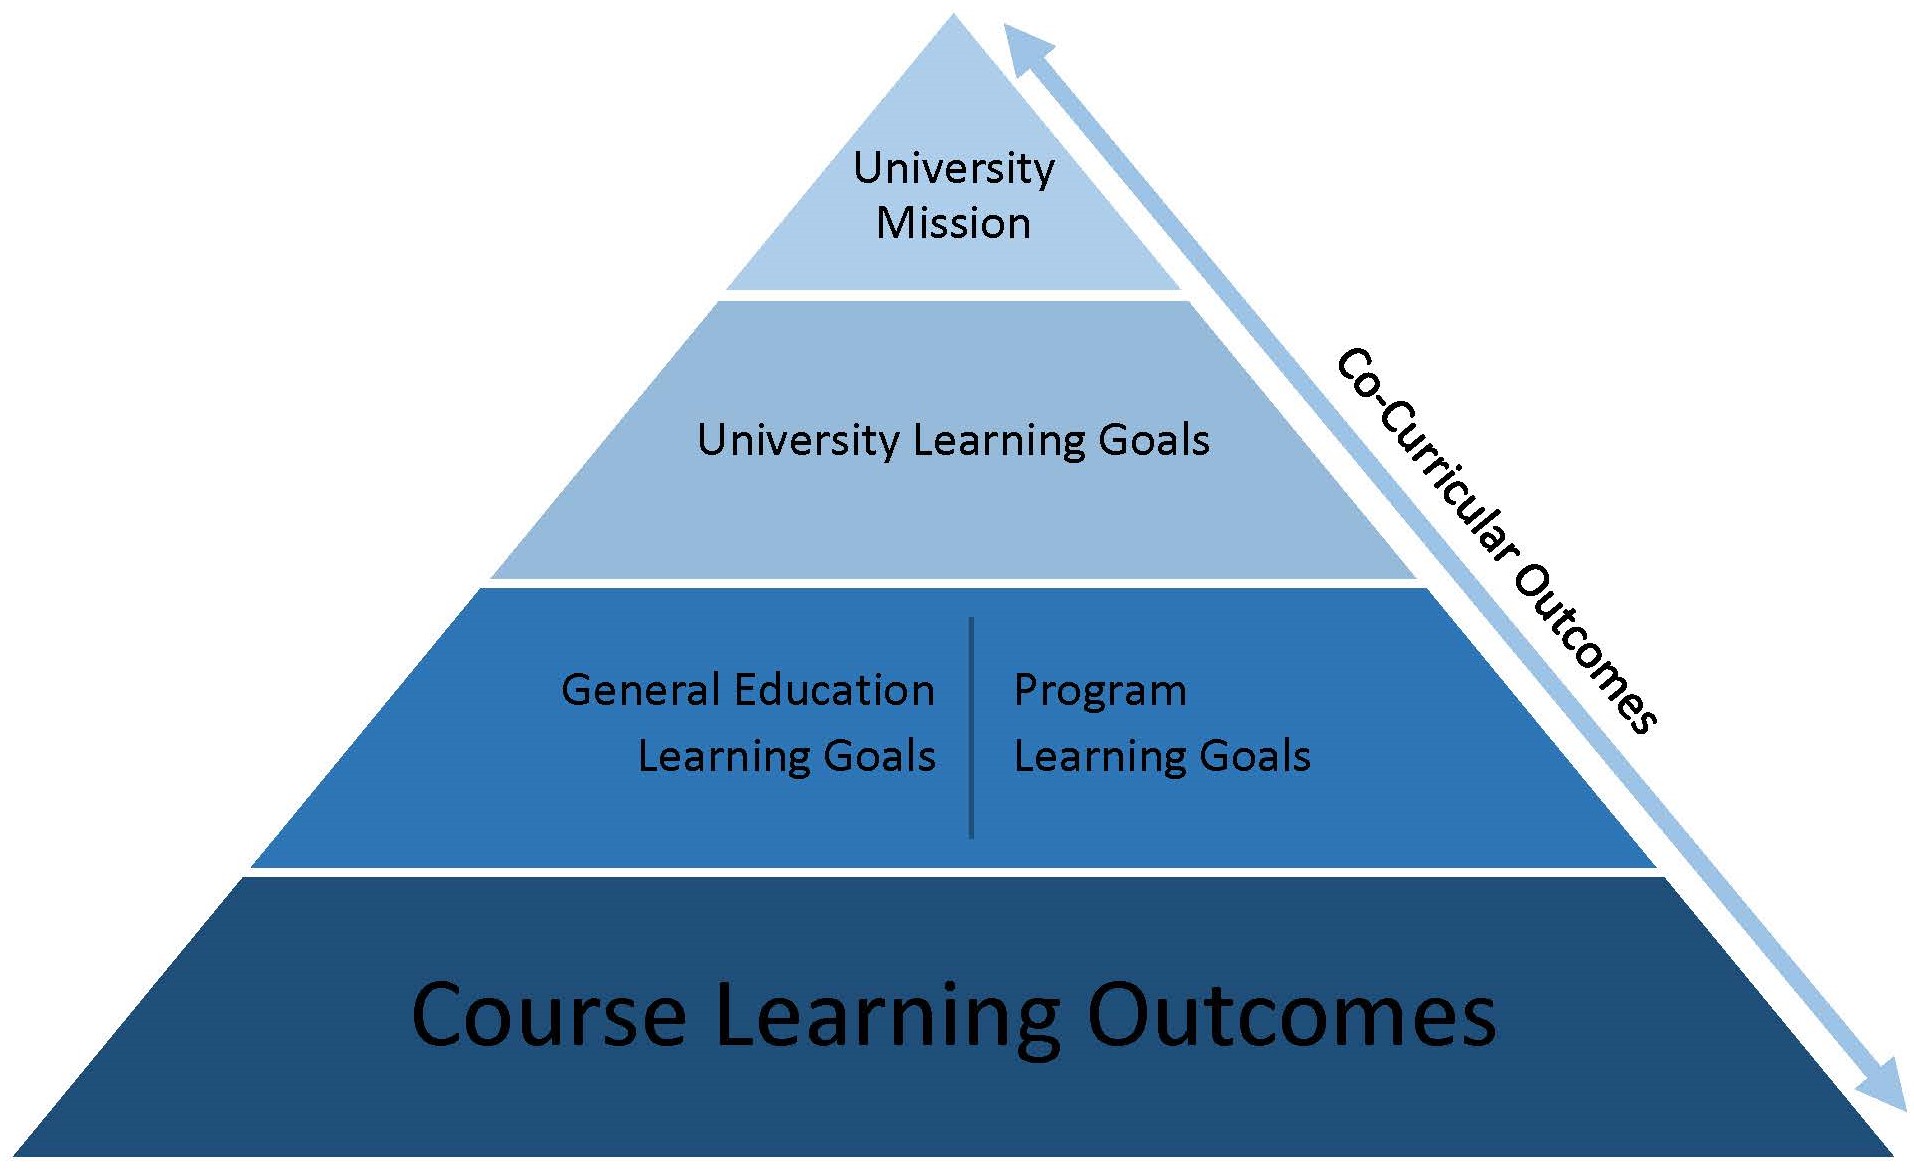 Institutional Pyramid - University Mission at top, Institutional Learning Goals, General Education and Program Learning Outcomes, and Course Learning Outcomes at bottom